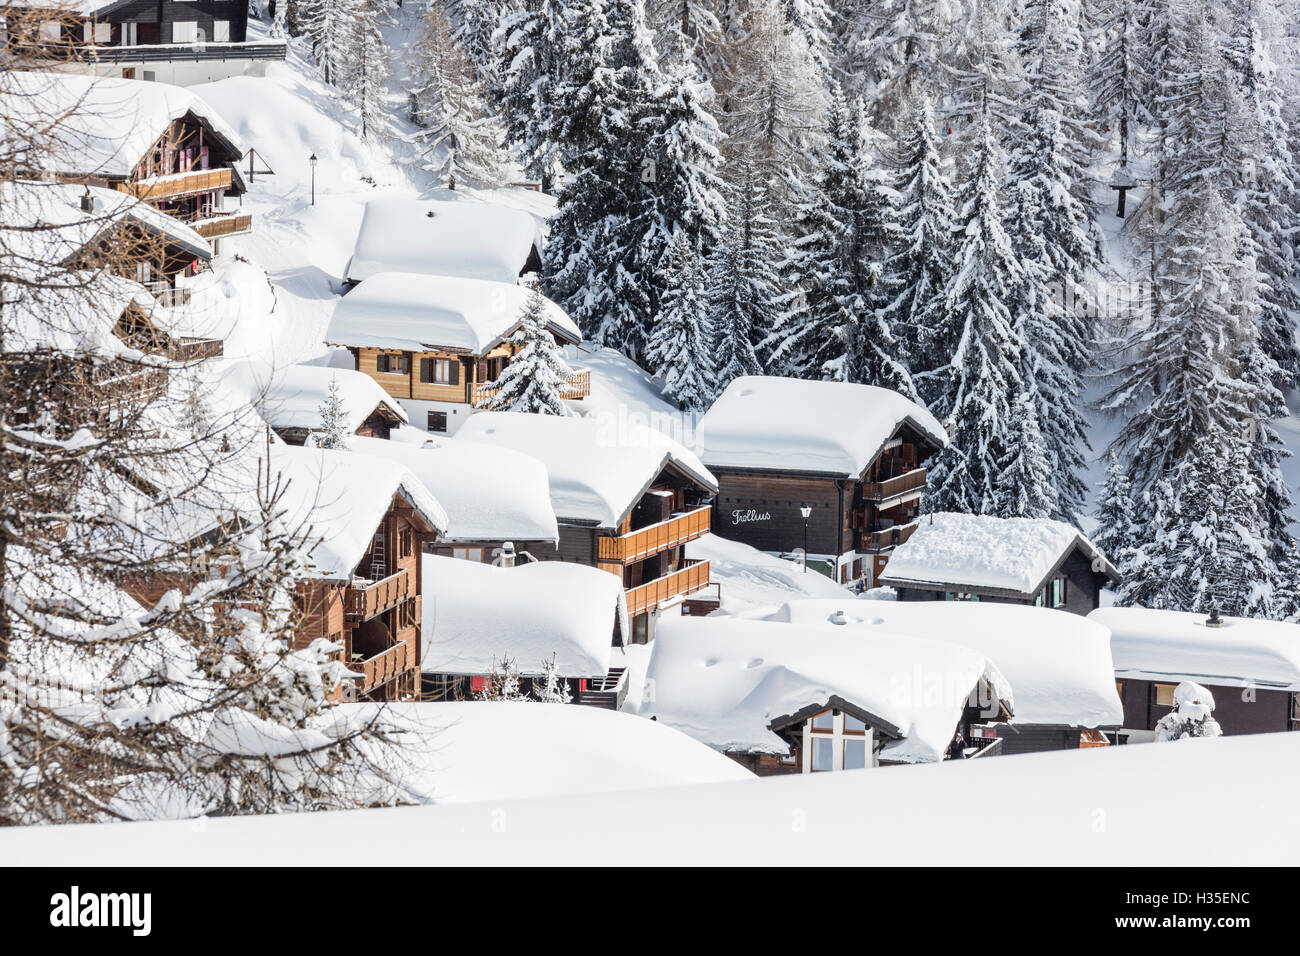 The snowy woods frame the typical mountain huts, Bettmeralp, district of Raron, canton of Valais, Switzerland Stock Photo